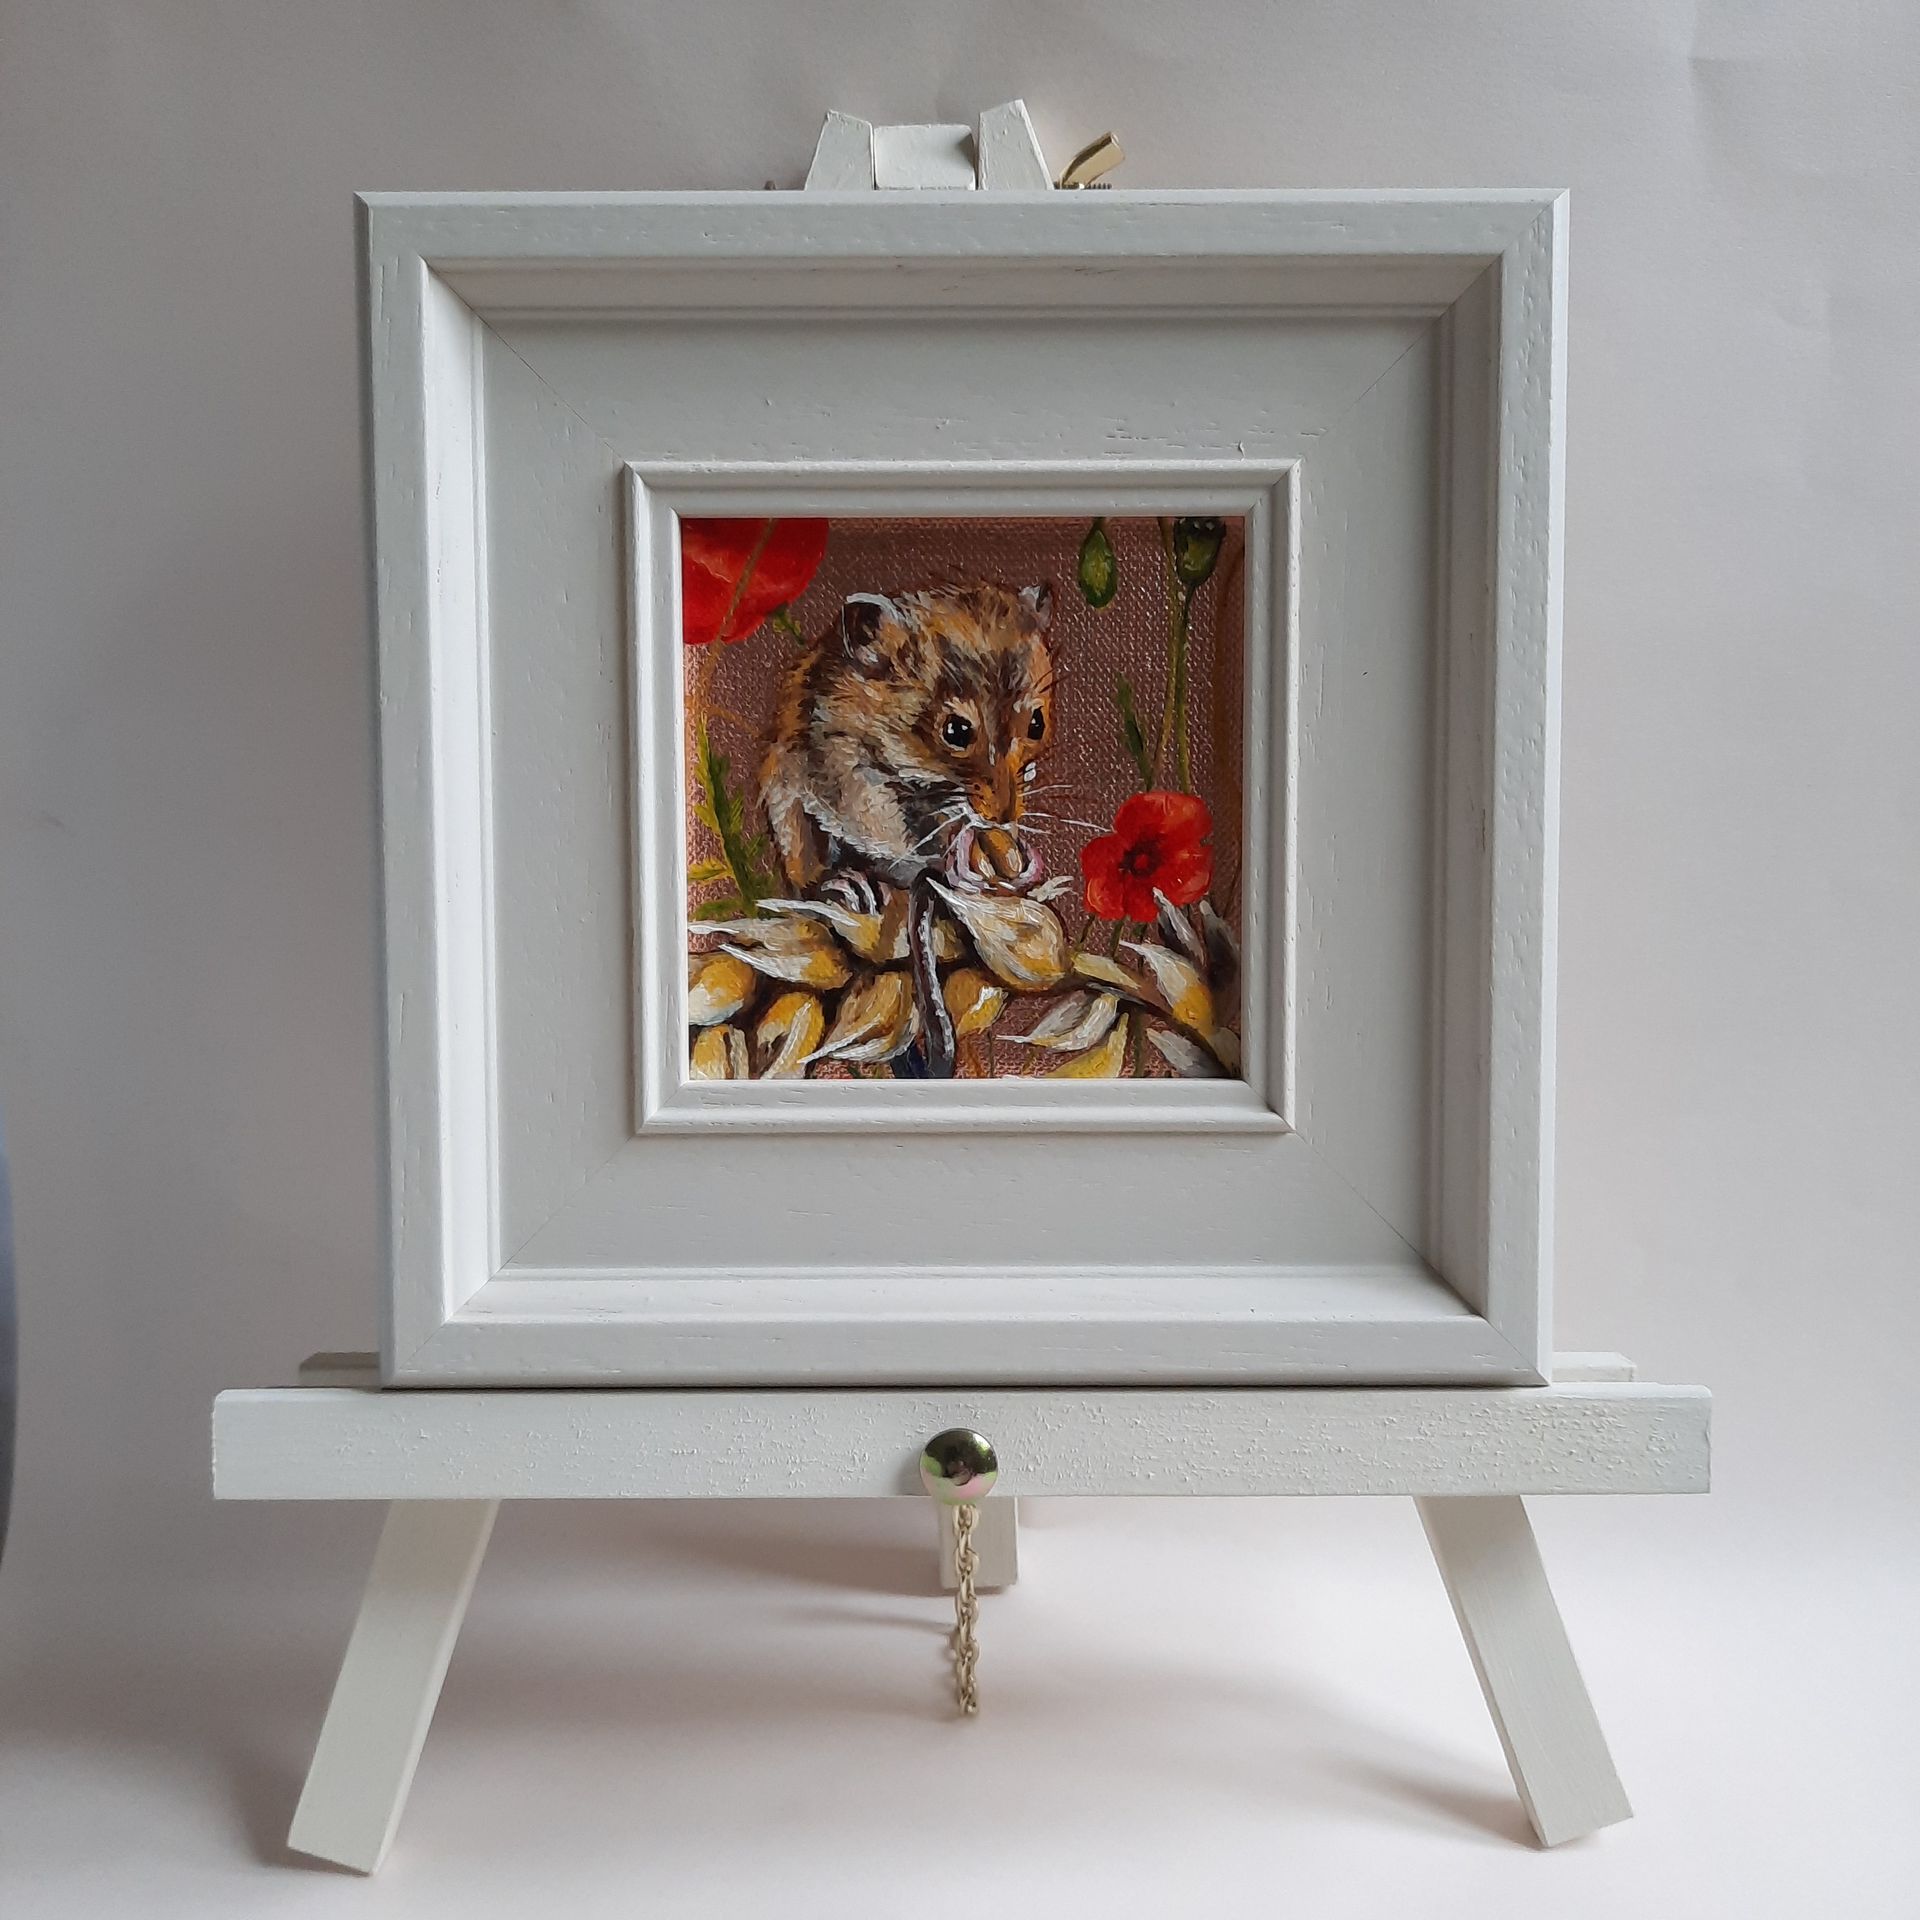 An oil painting of a Harvest Mouse sitting on a curved ear of wheat, eating a grain. Bright red poppy flowers are in the background. The painting is on shiny copper leaf and is shown framed in a cream coloured frame on a matching mini easel